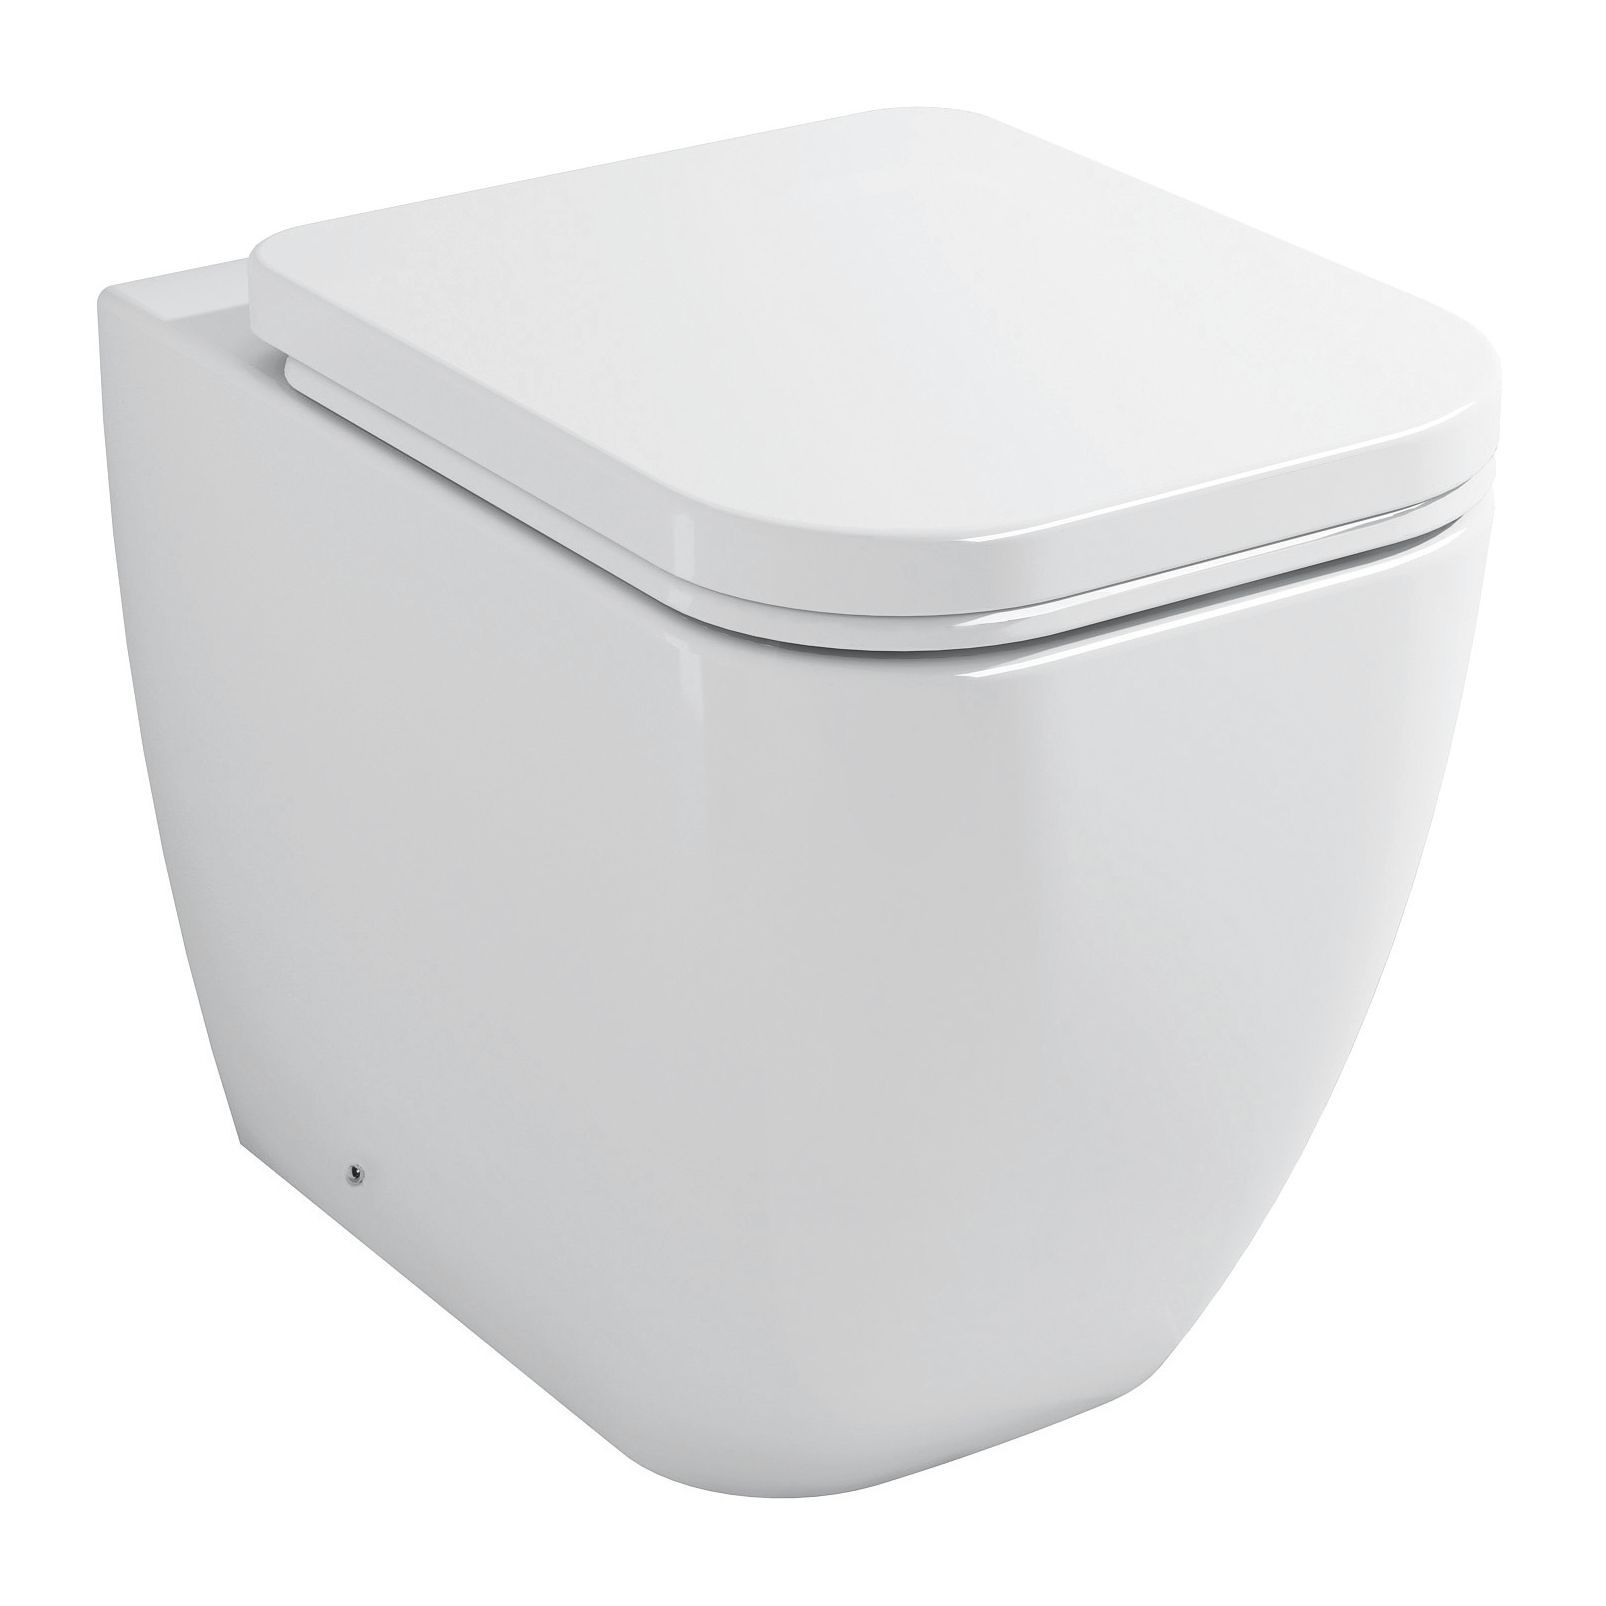 Cooke & Lewis Affini Contemporary Back to wall Toilet with Soft close Seat Departments DIY